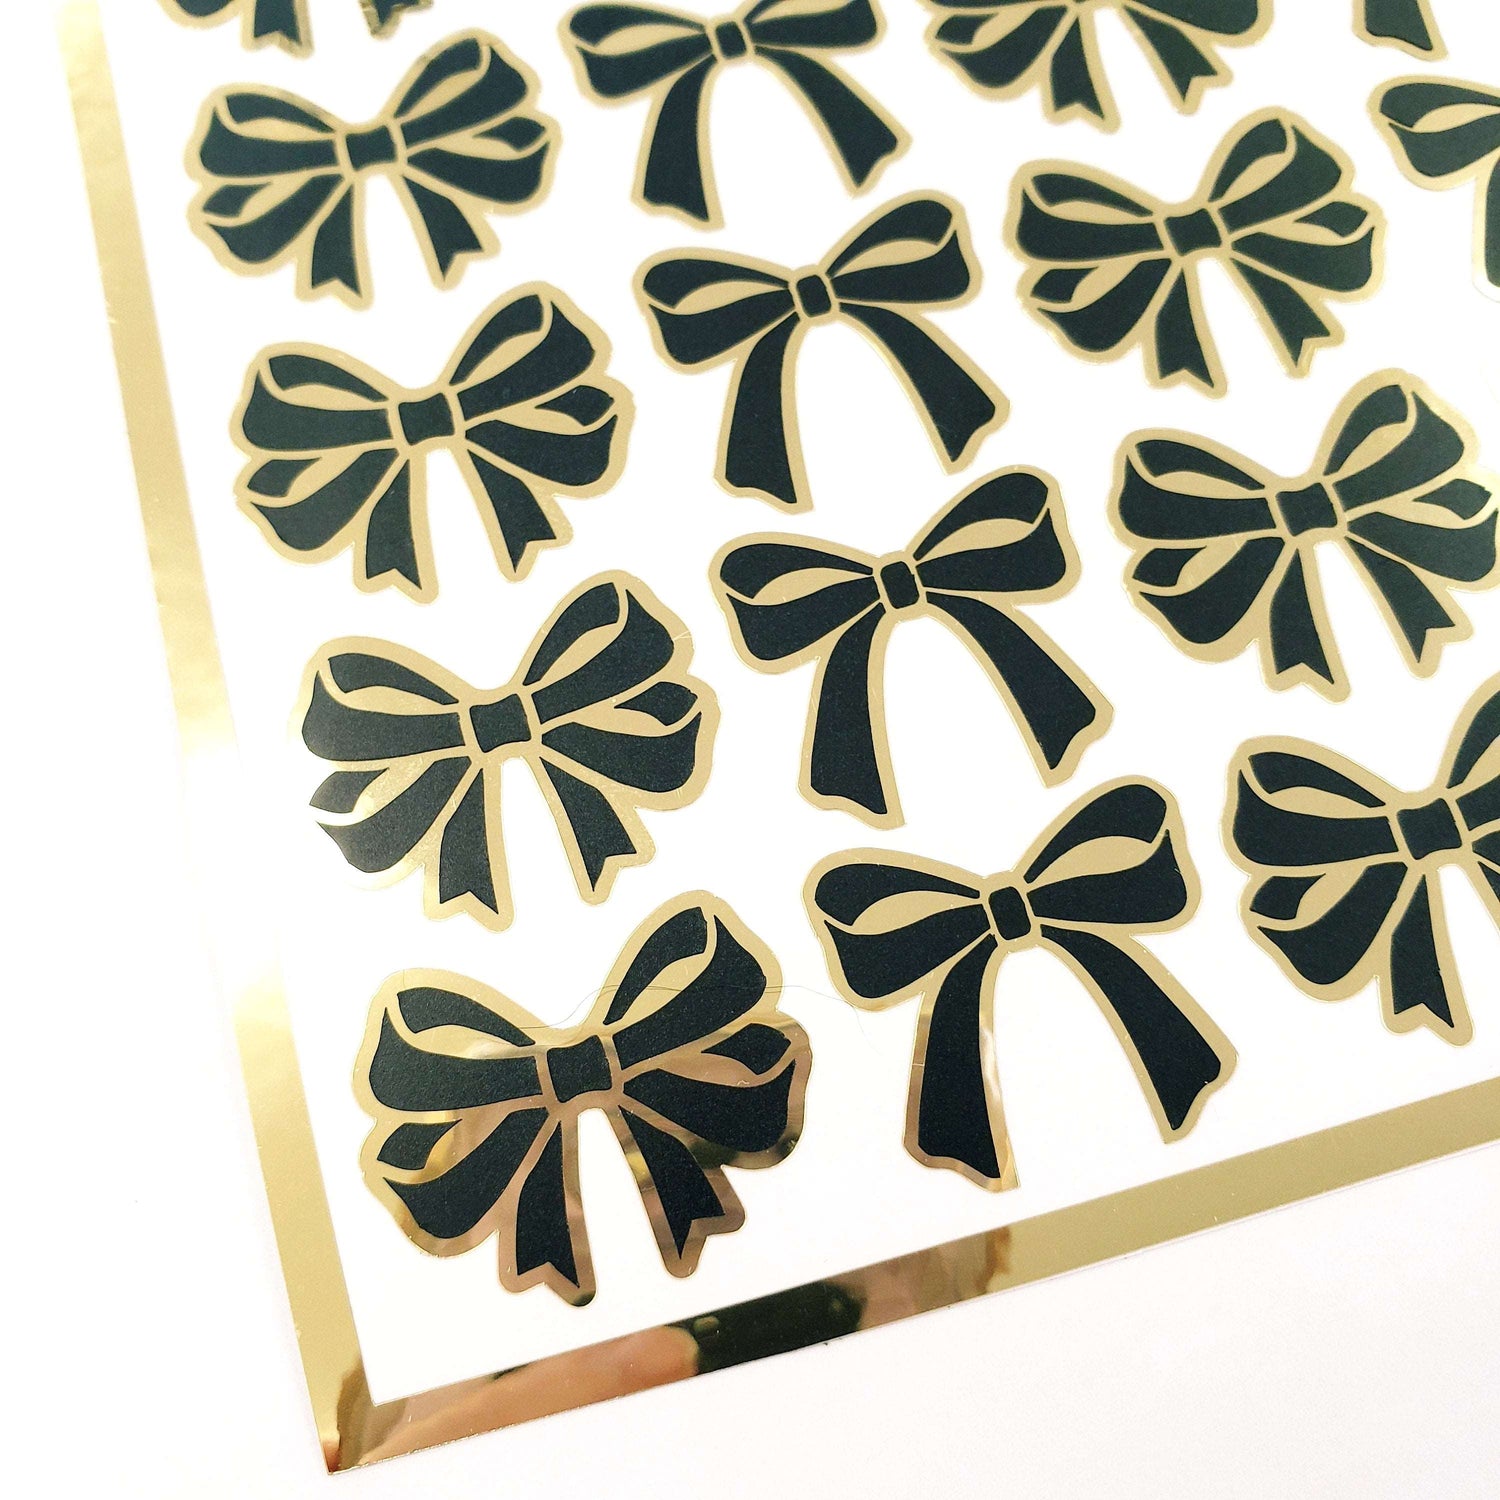 Bow Stickers, set of 28 black and gold ribbon shaped decals, coquette aesthetic, peel and stick bows for cards, invitations and envelopes.